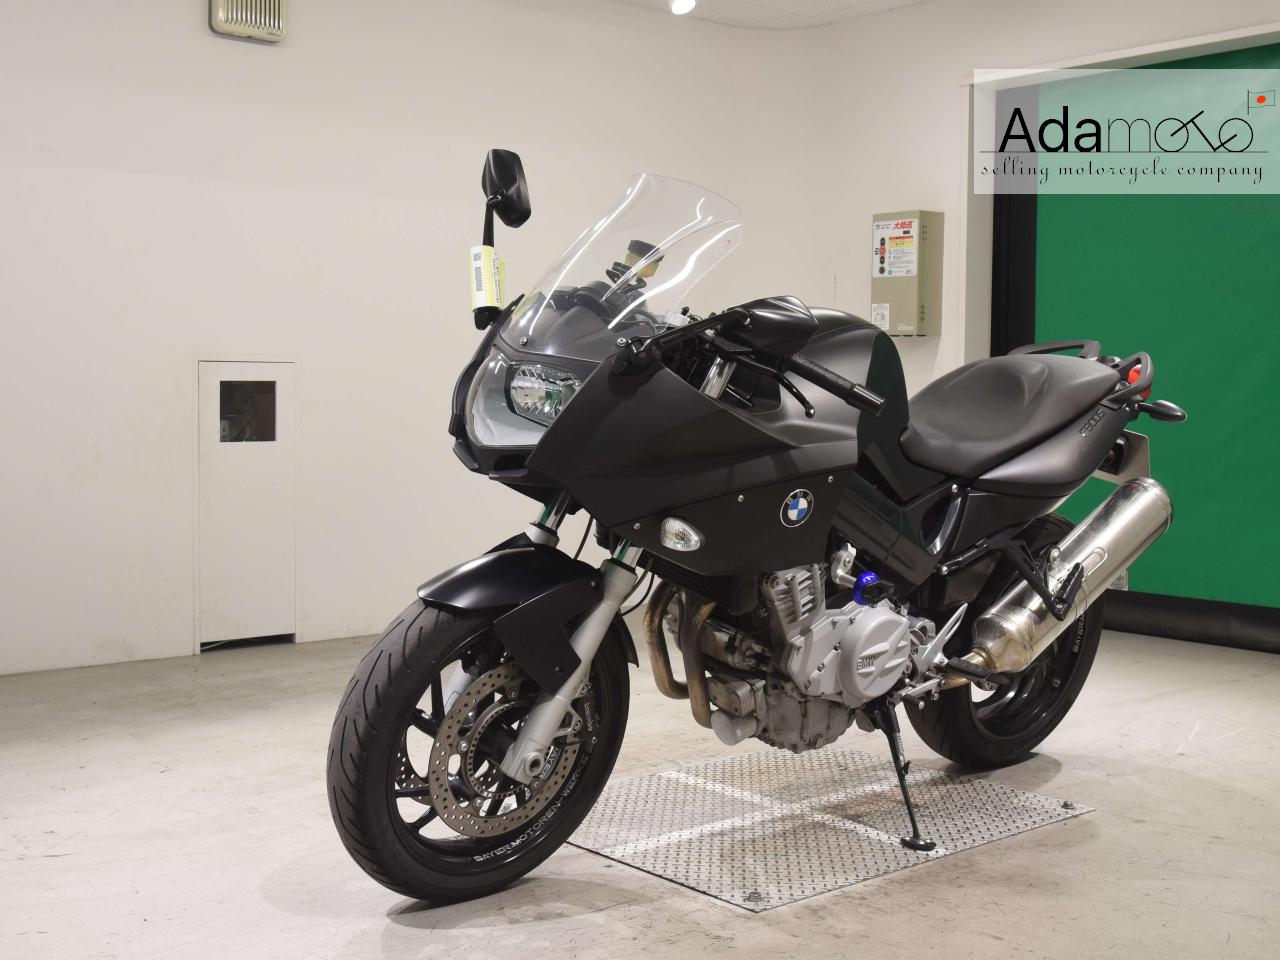 BMW F800S - Adamoto - Motorcycles from Japan